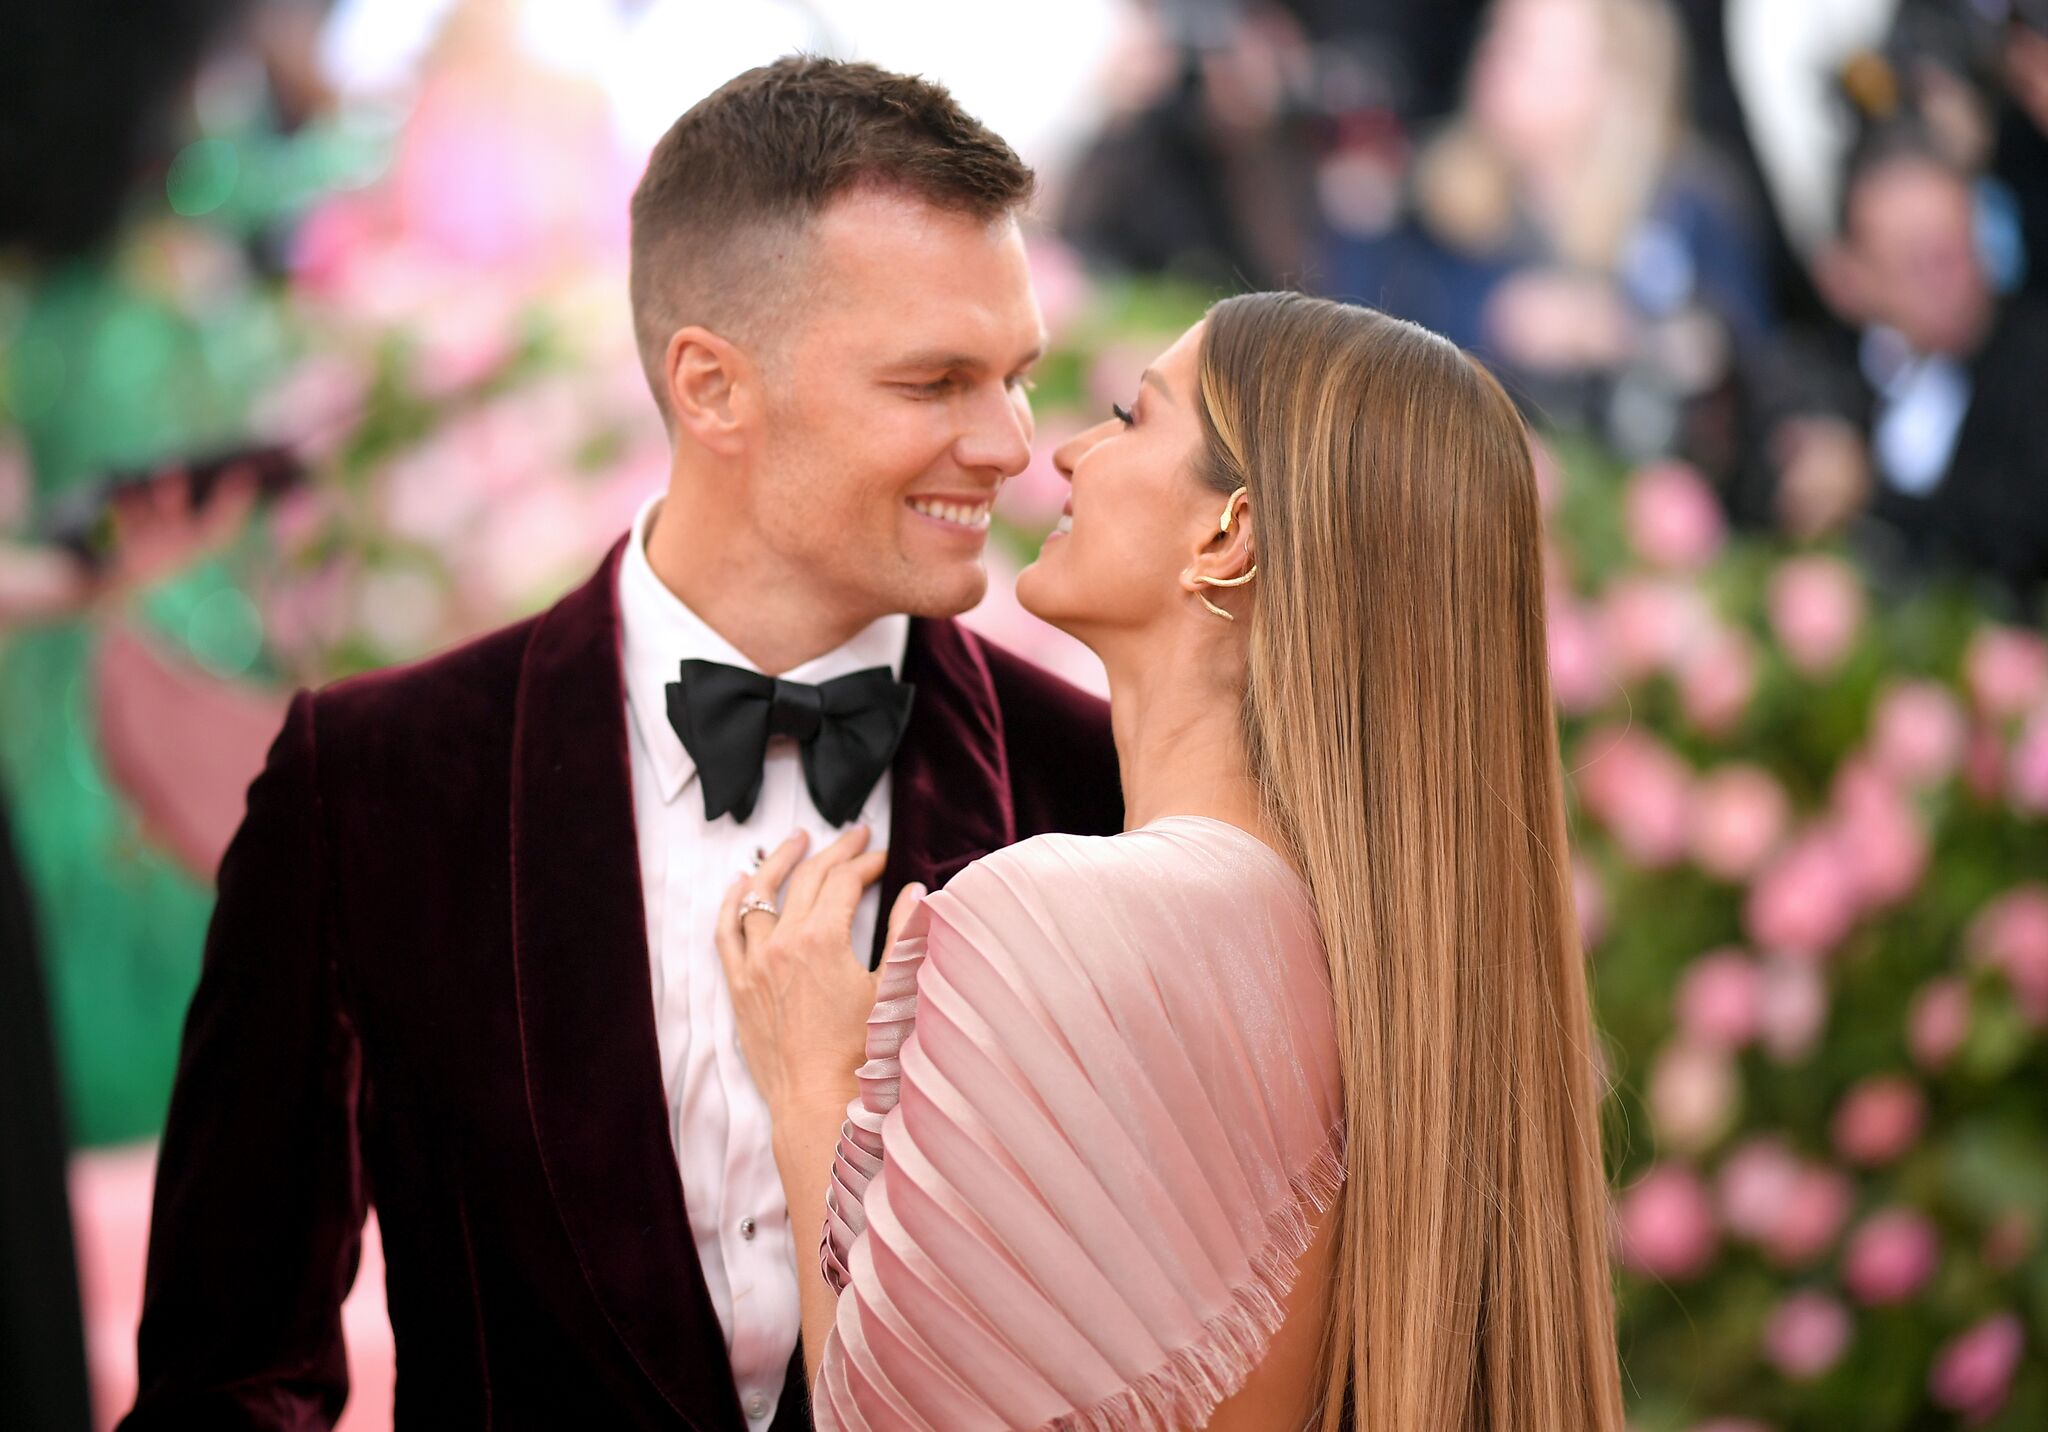  Tom Brady and Gisele Bundchen attend The 2019 Met Gala Celebrating Camp: Notes on Fashion at Metropolitan Museum of Art | Getty Images